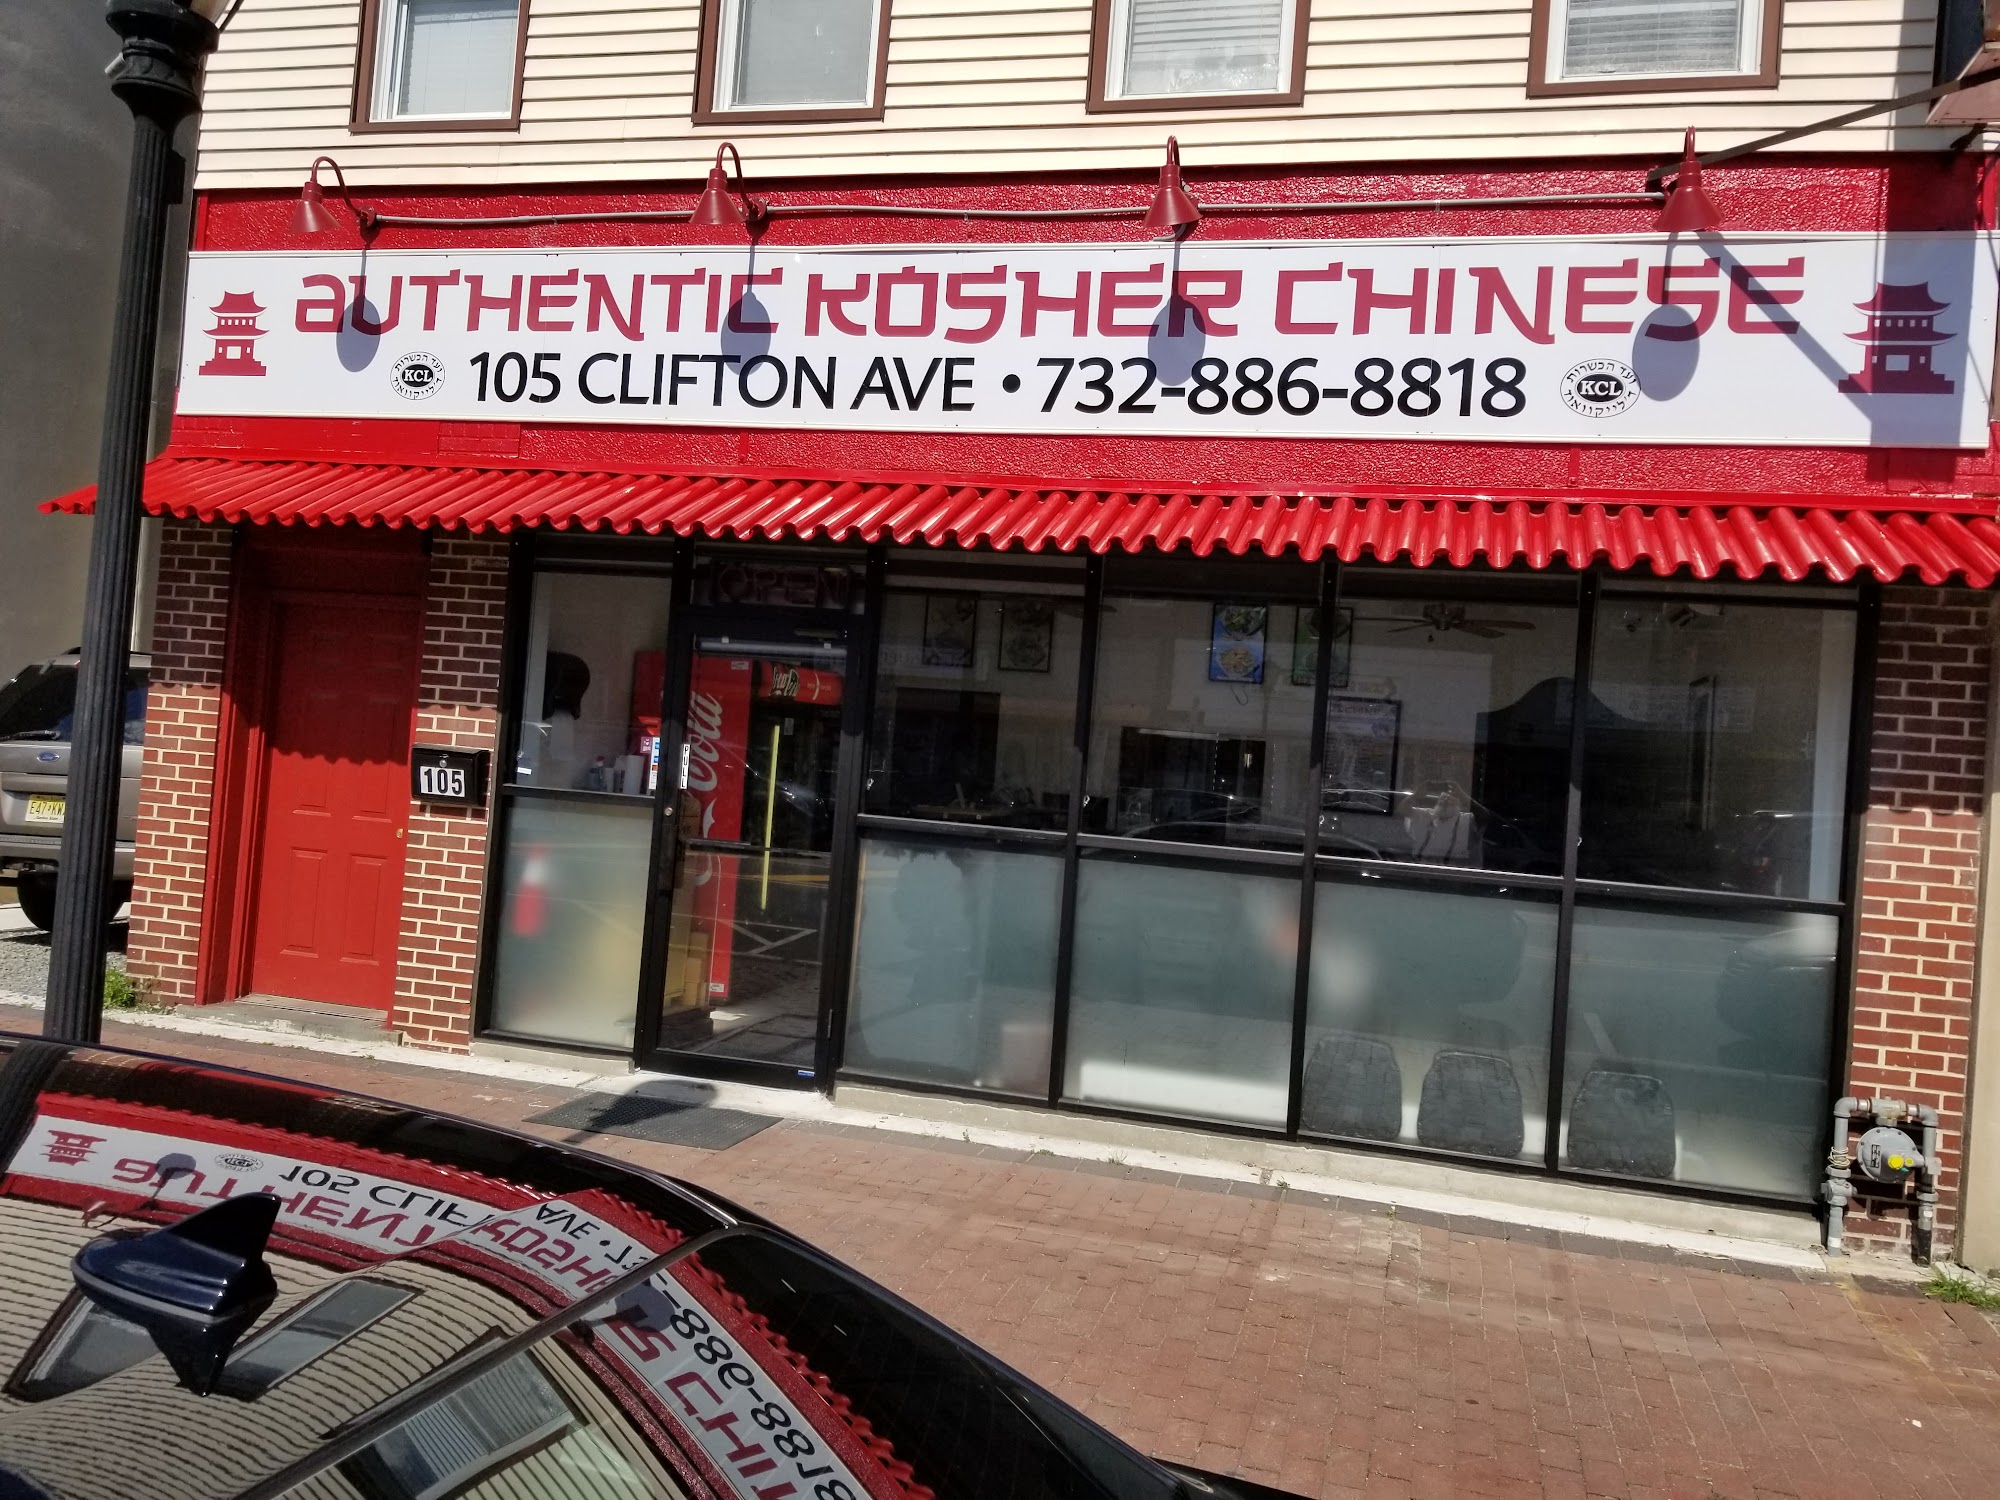 AUTHENTIC KOSHER CHINESE & CATERING